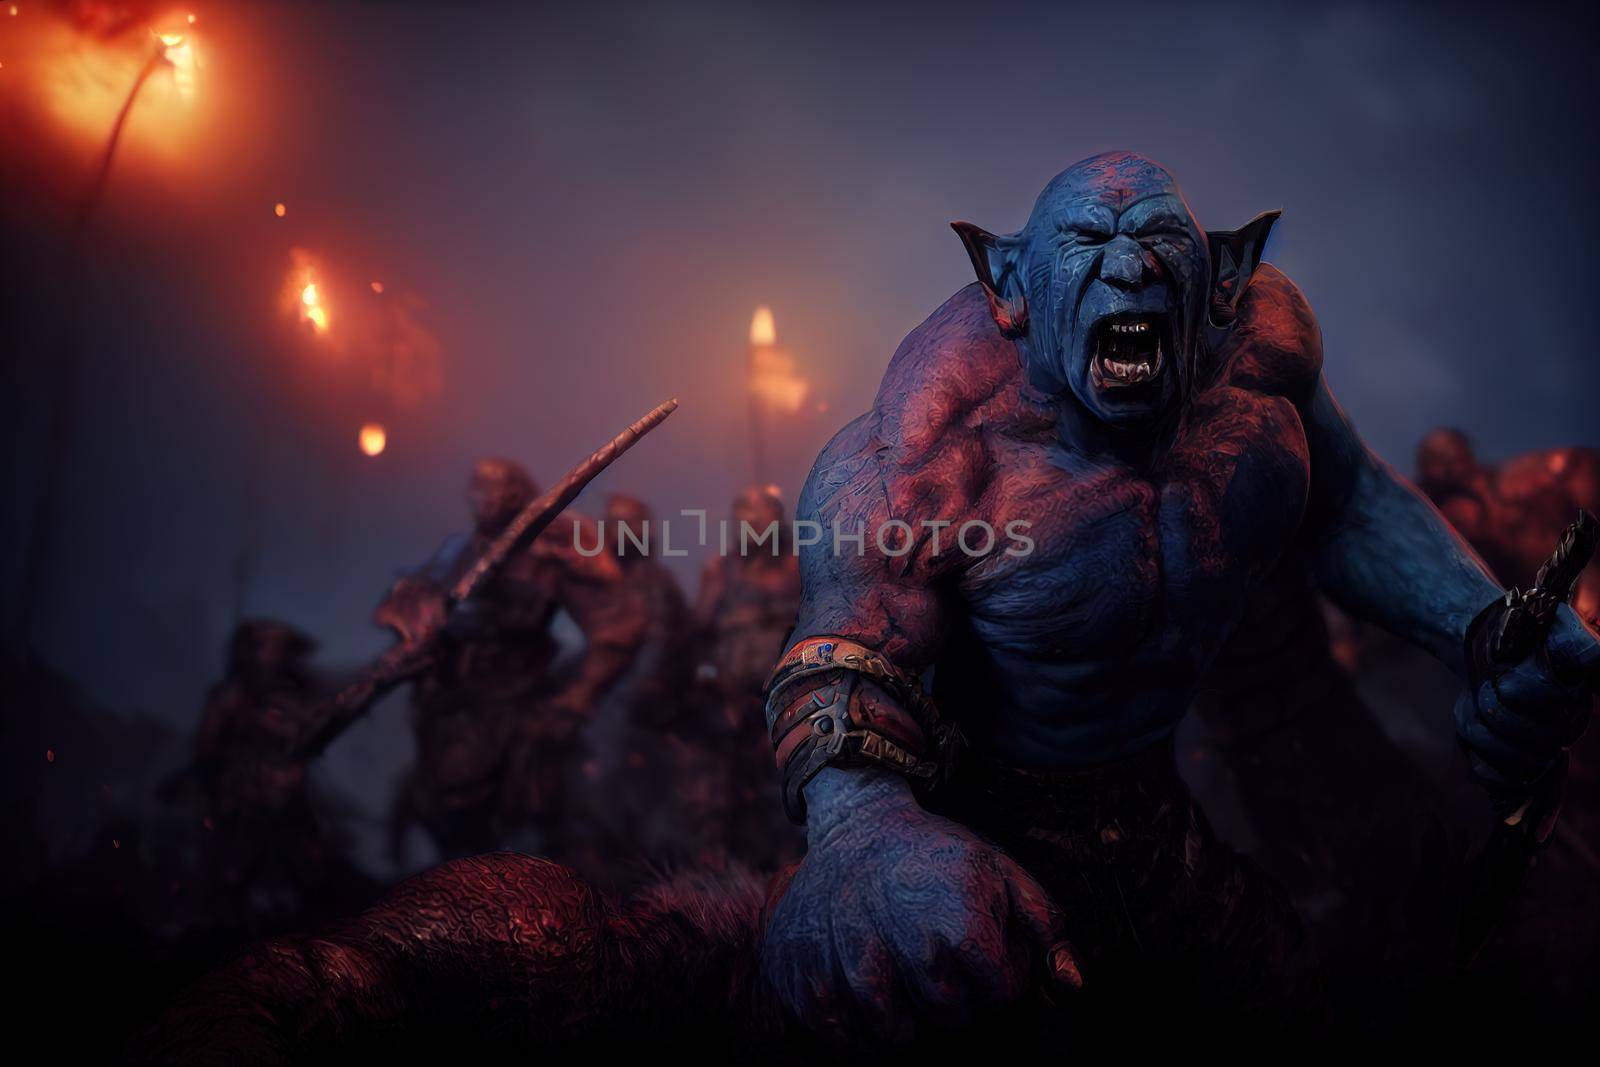 fairy tale orc army. High quality 3d illustration